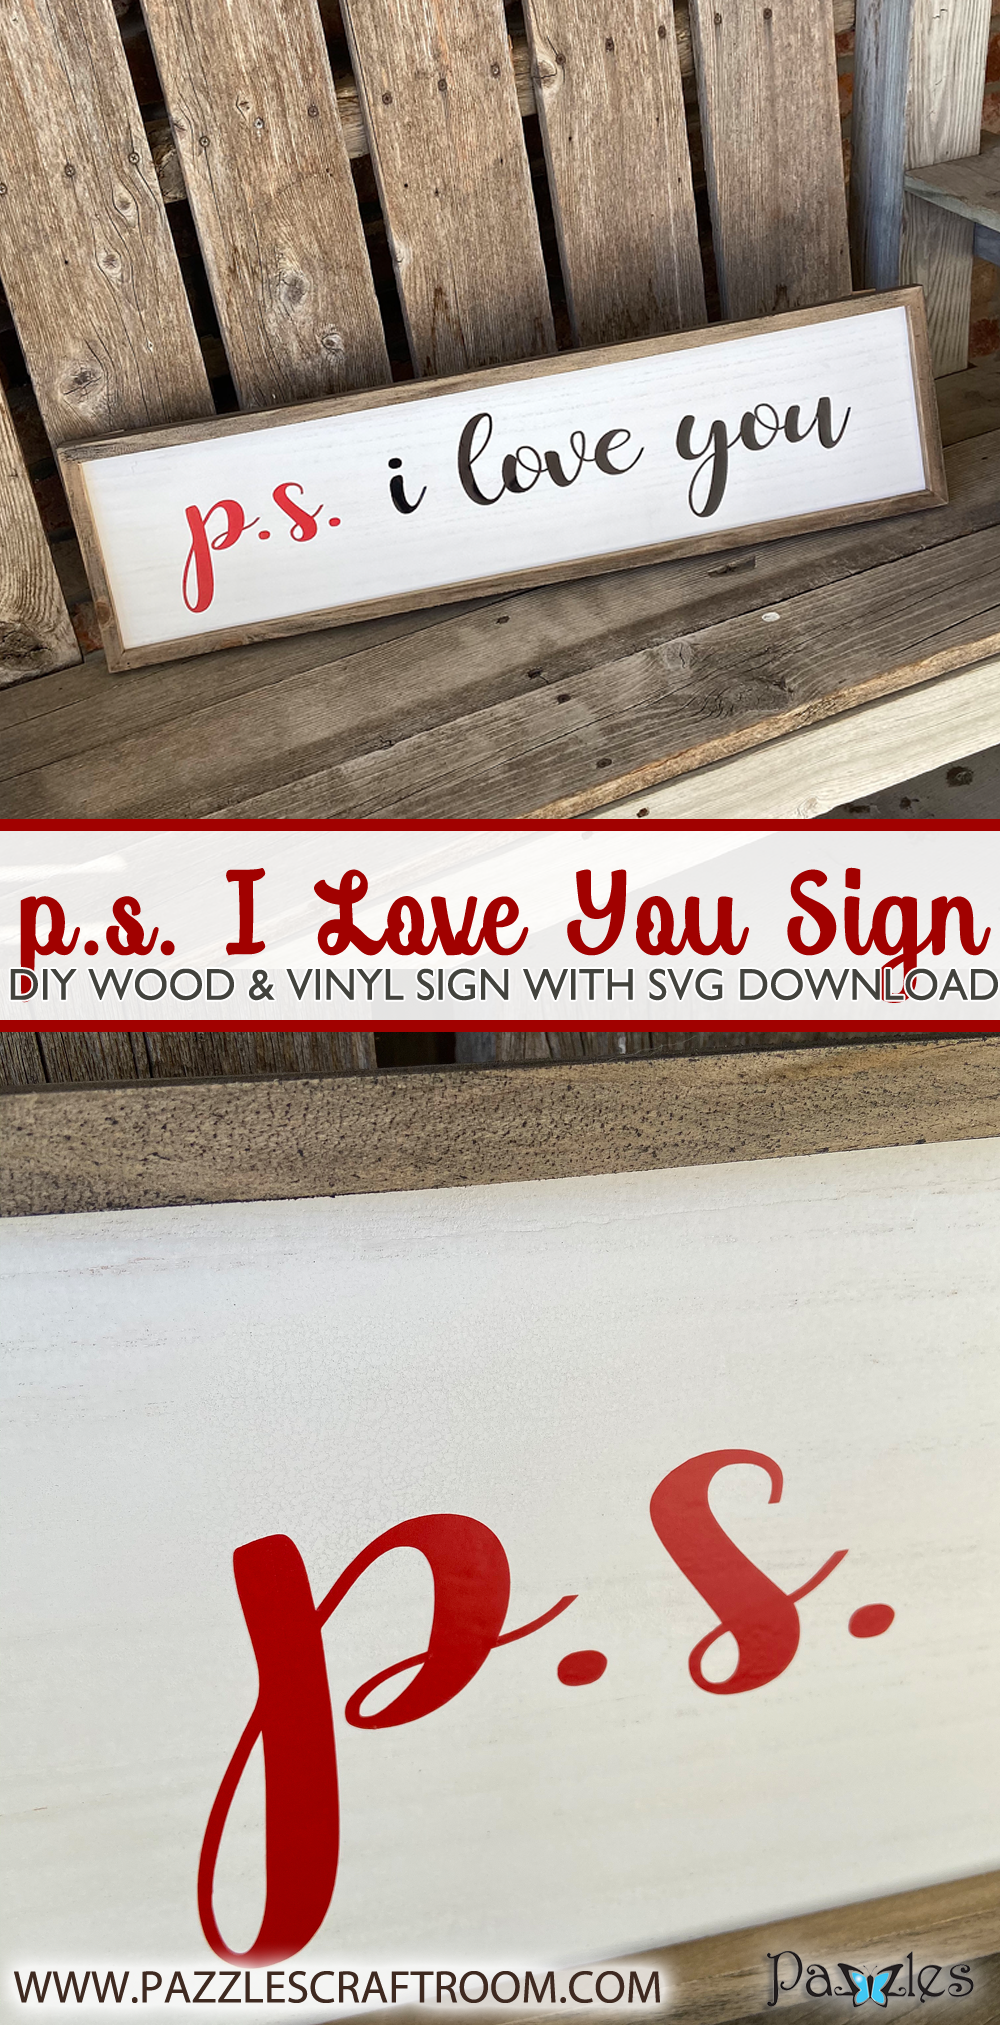 Pazzles DIY I Love You Sign made with wood and vinyl. Instant SVG download compatible with all major electronic cutters including Pazzles Inspiration, Cricut, and Silhouette Cameo. Design by Sara Weber.